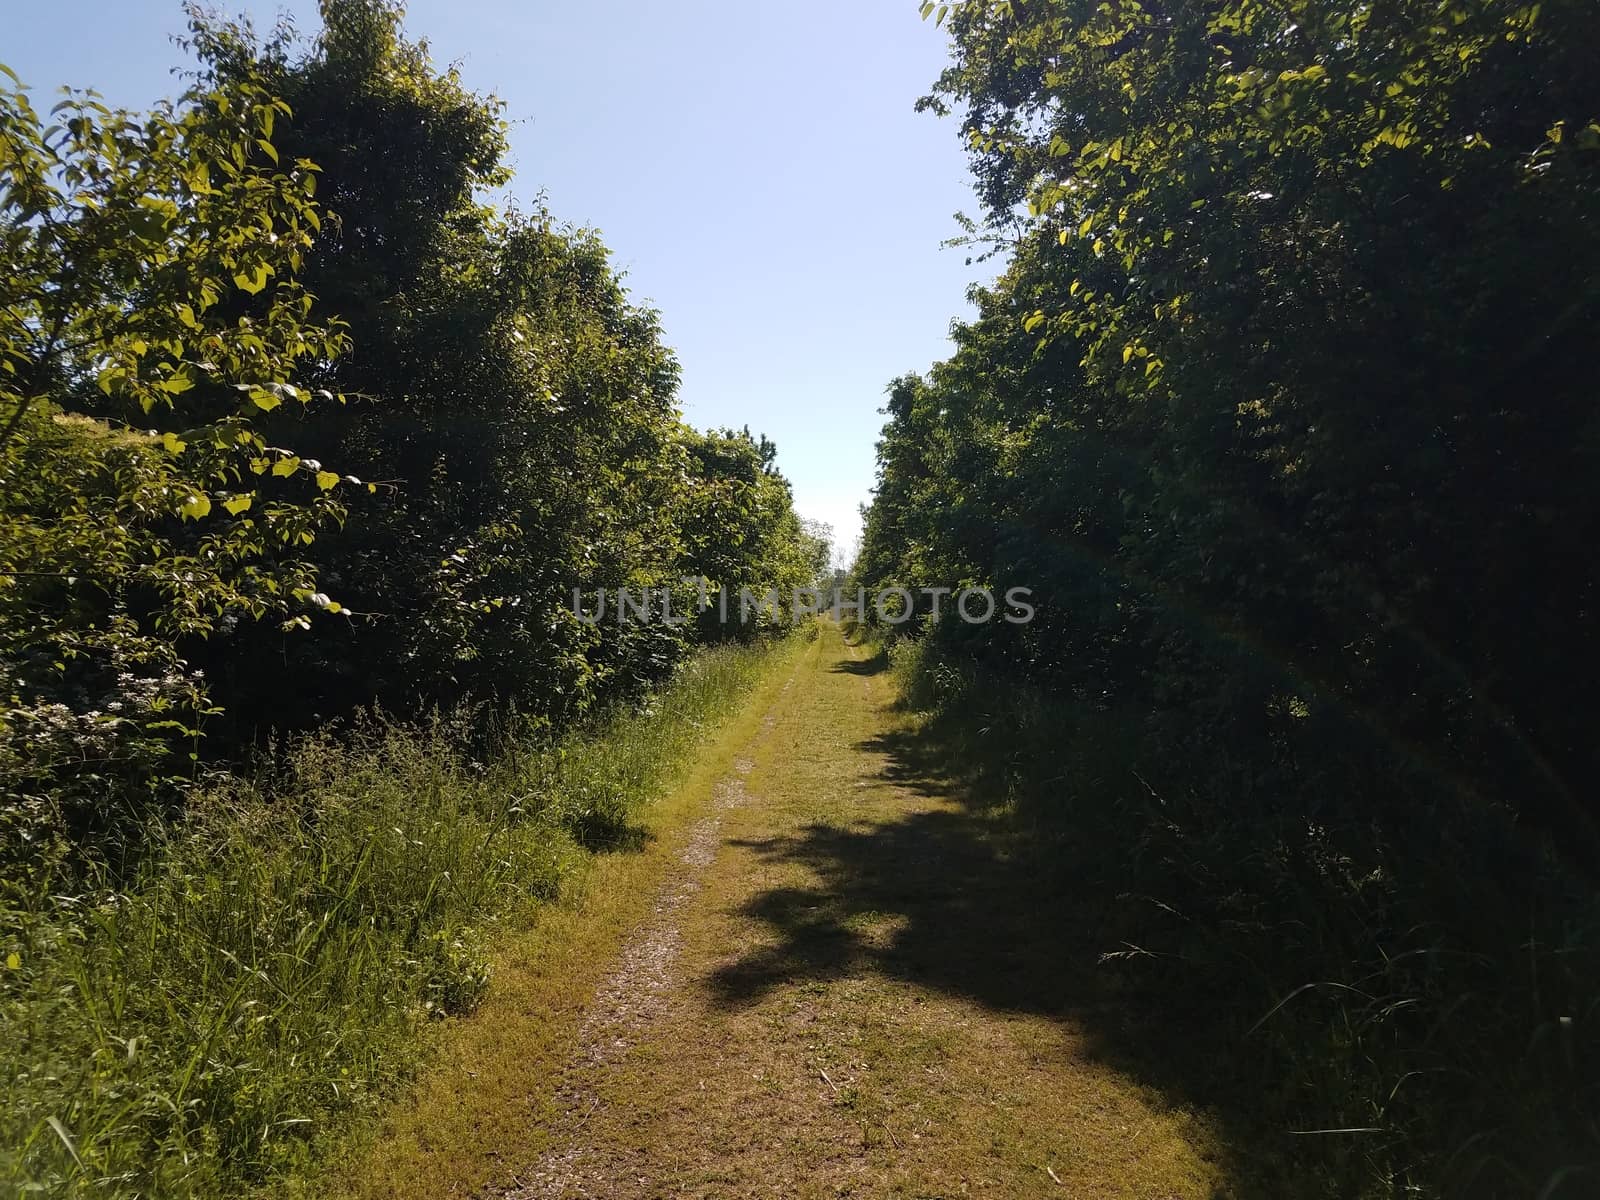 trail or path with trees with green leaves by stockphotofan1